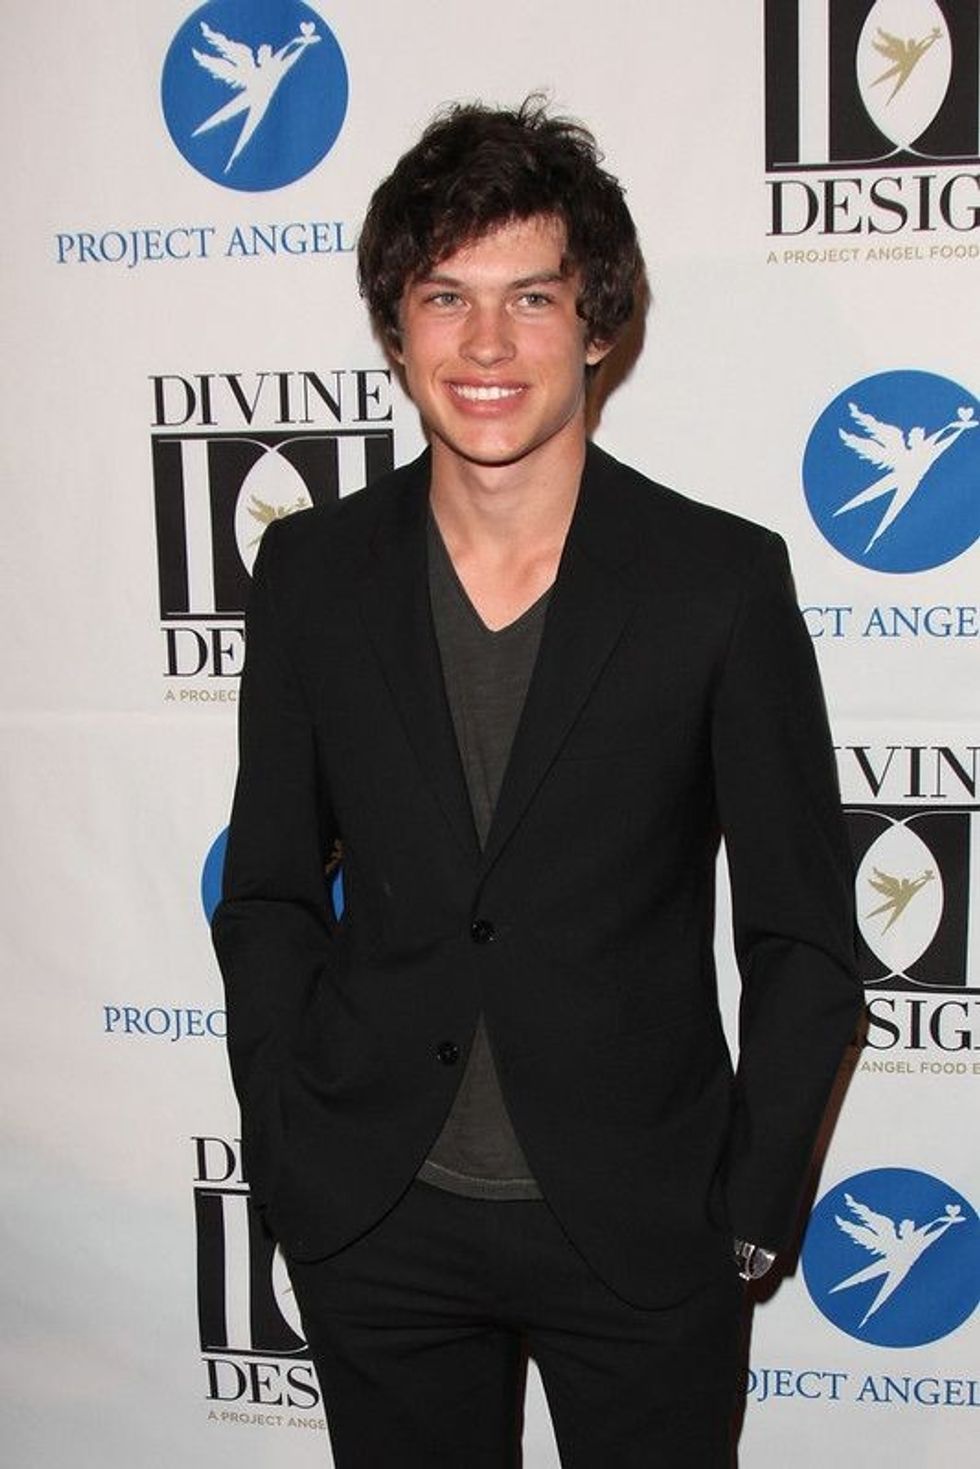 Read on to know amazing facts about Graham Phillips.